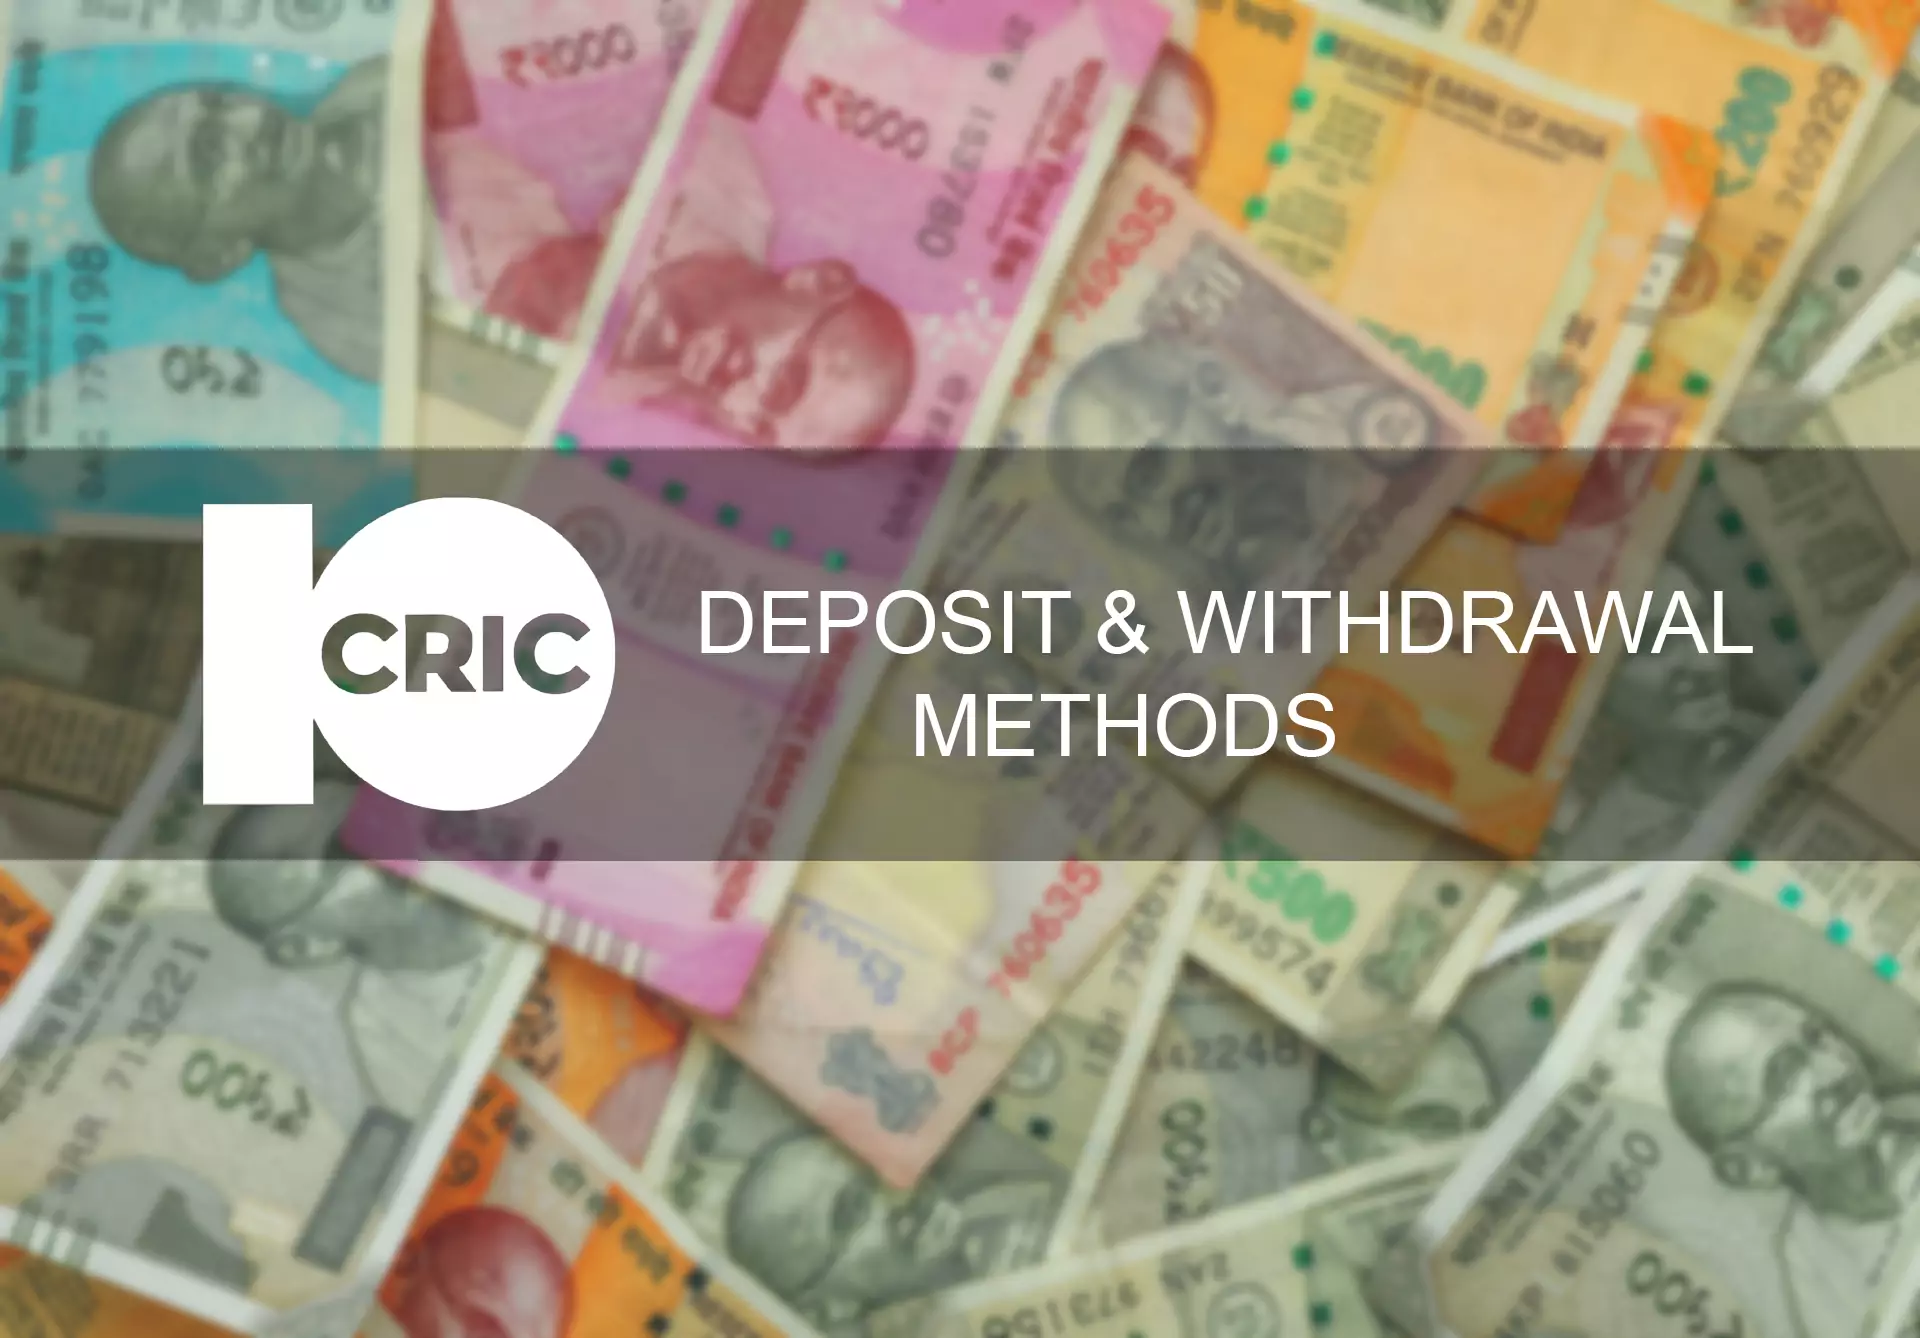 Use your usual system to deposit and withdraw funds.